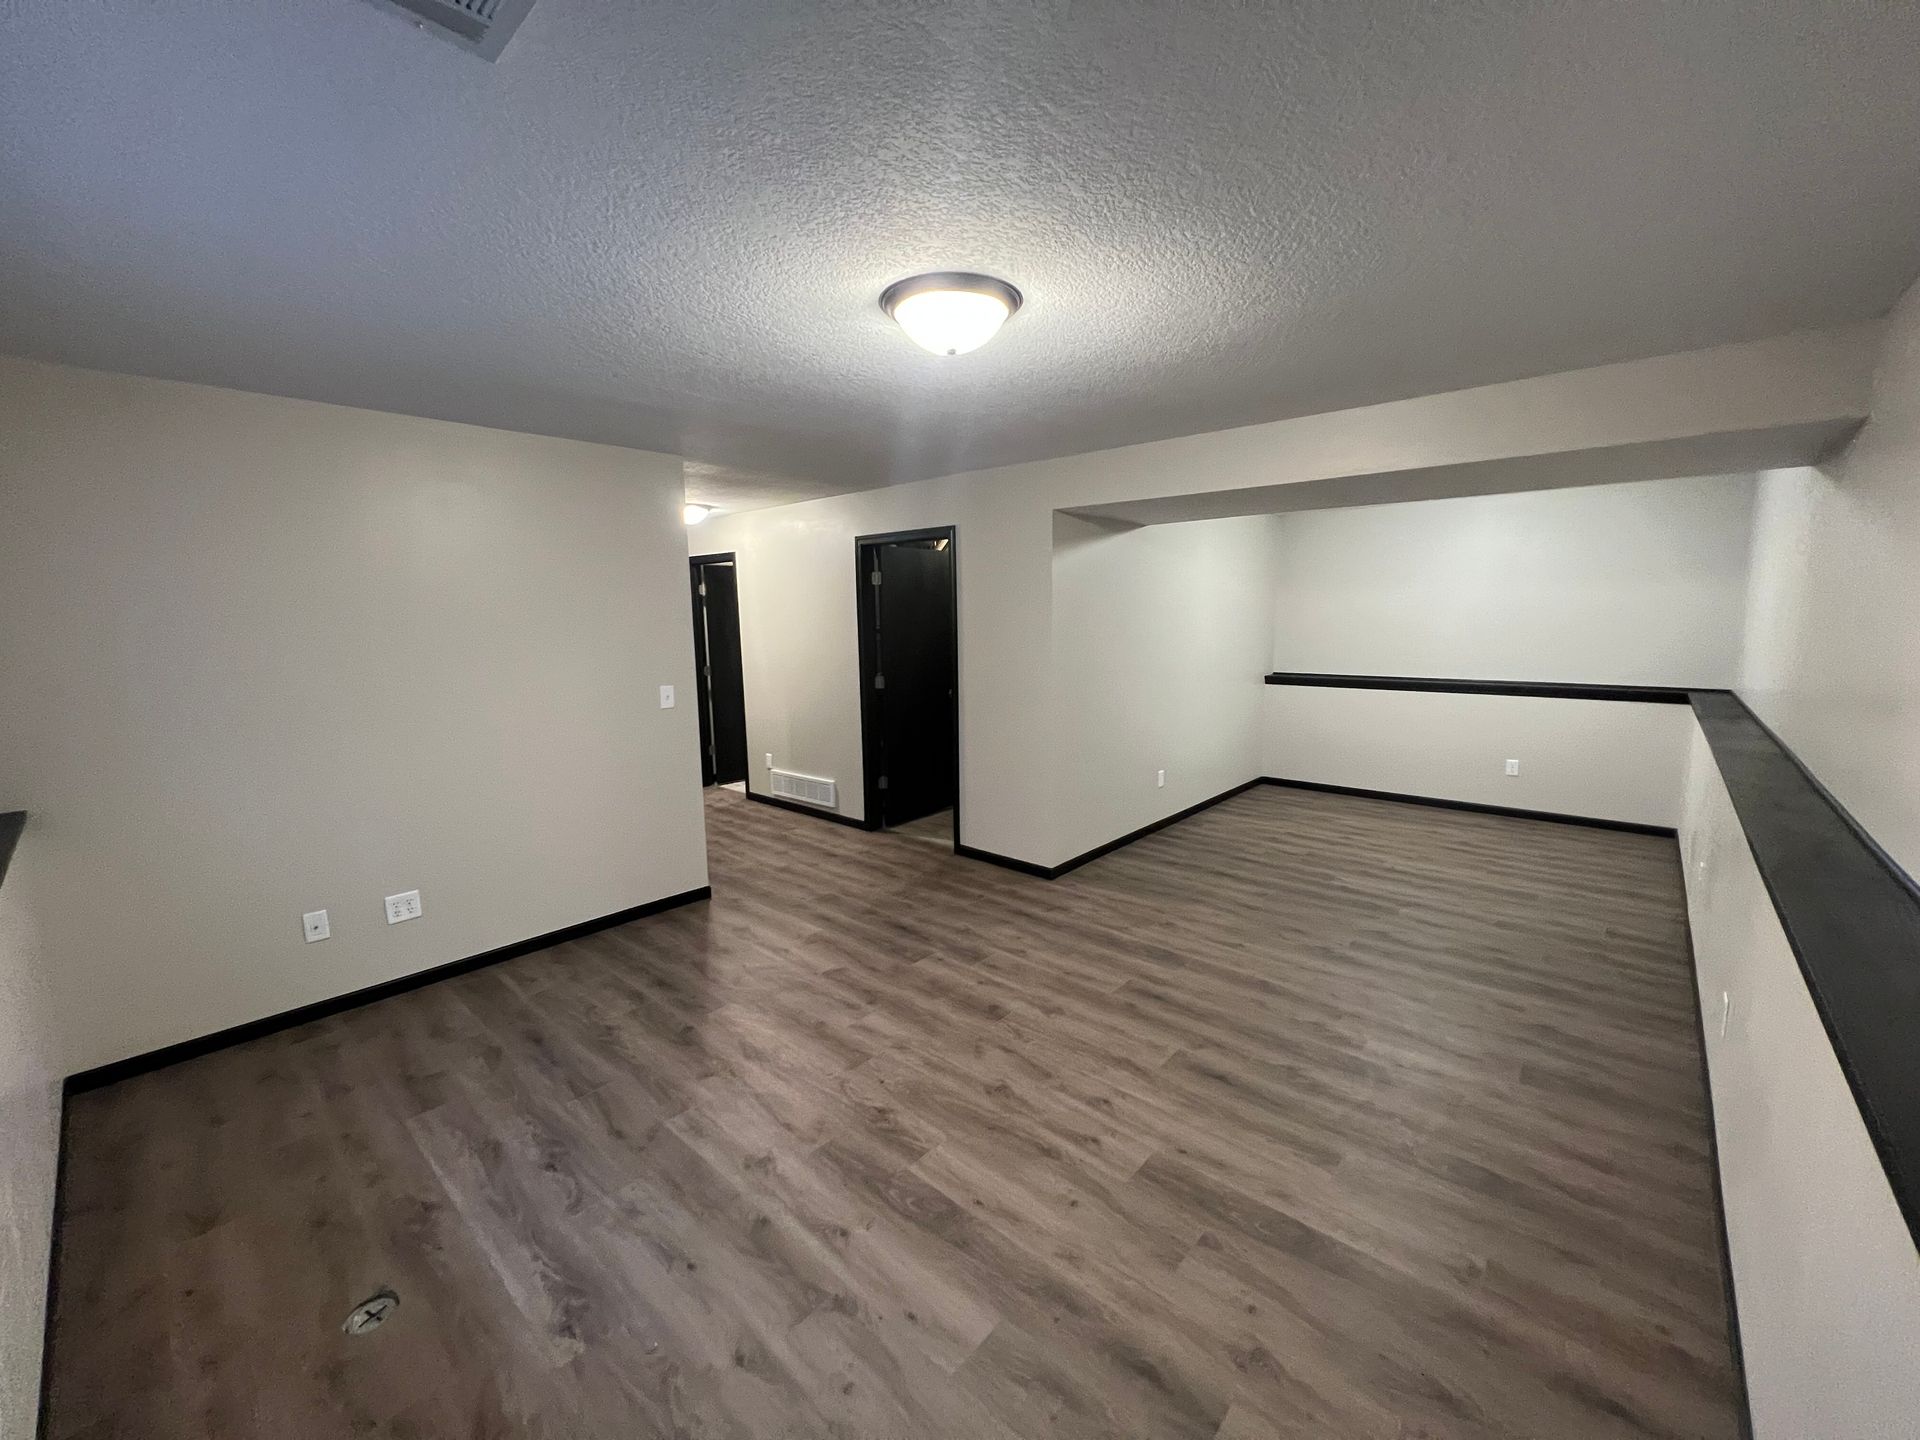 A large empty room with hardwood floors and white walls.